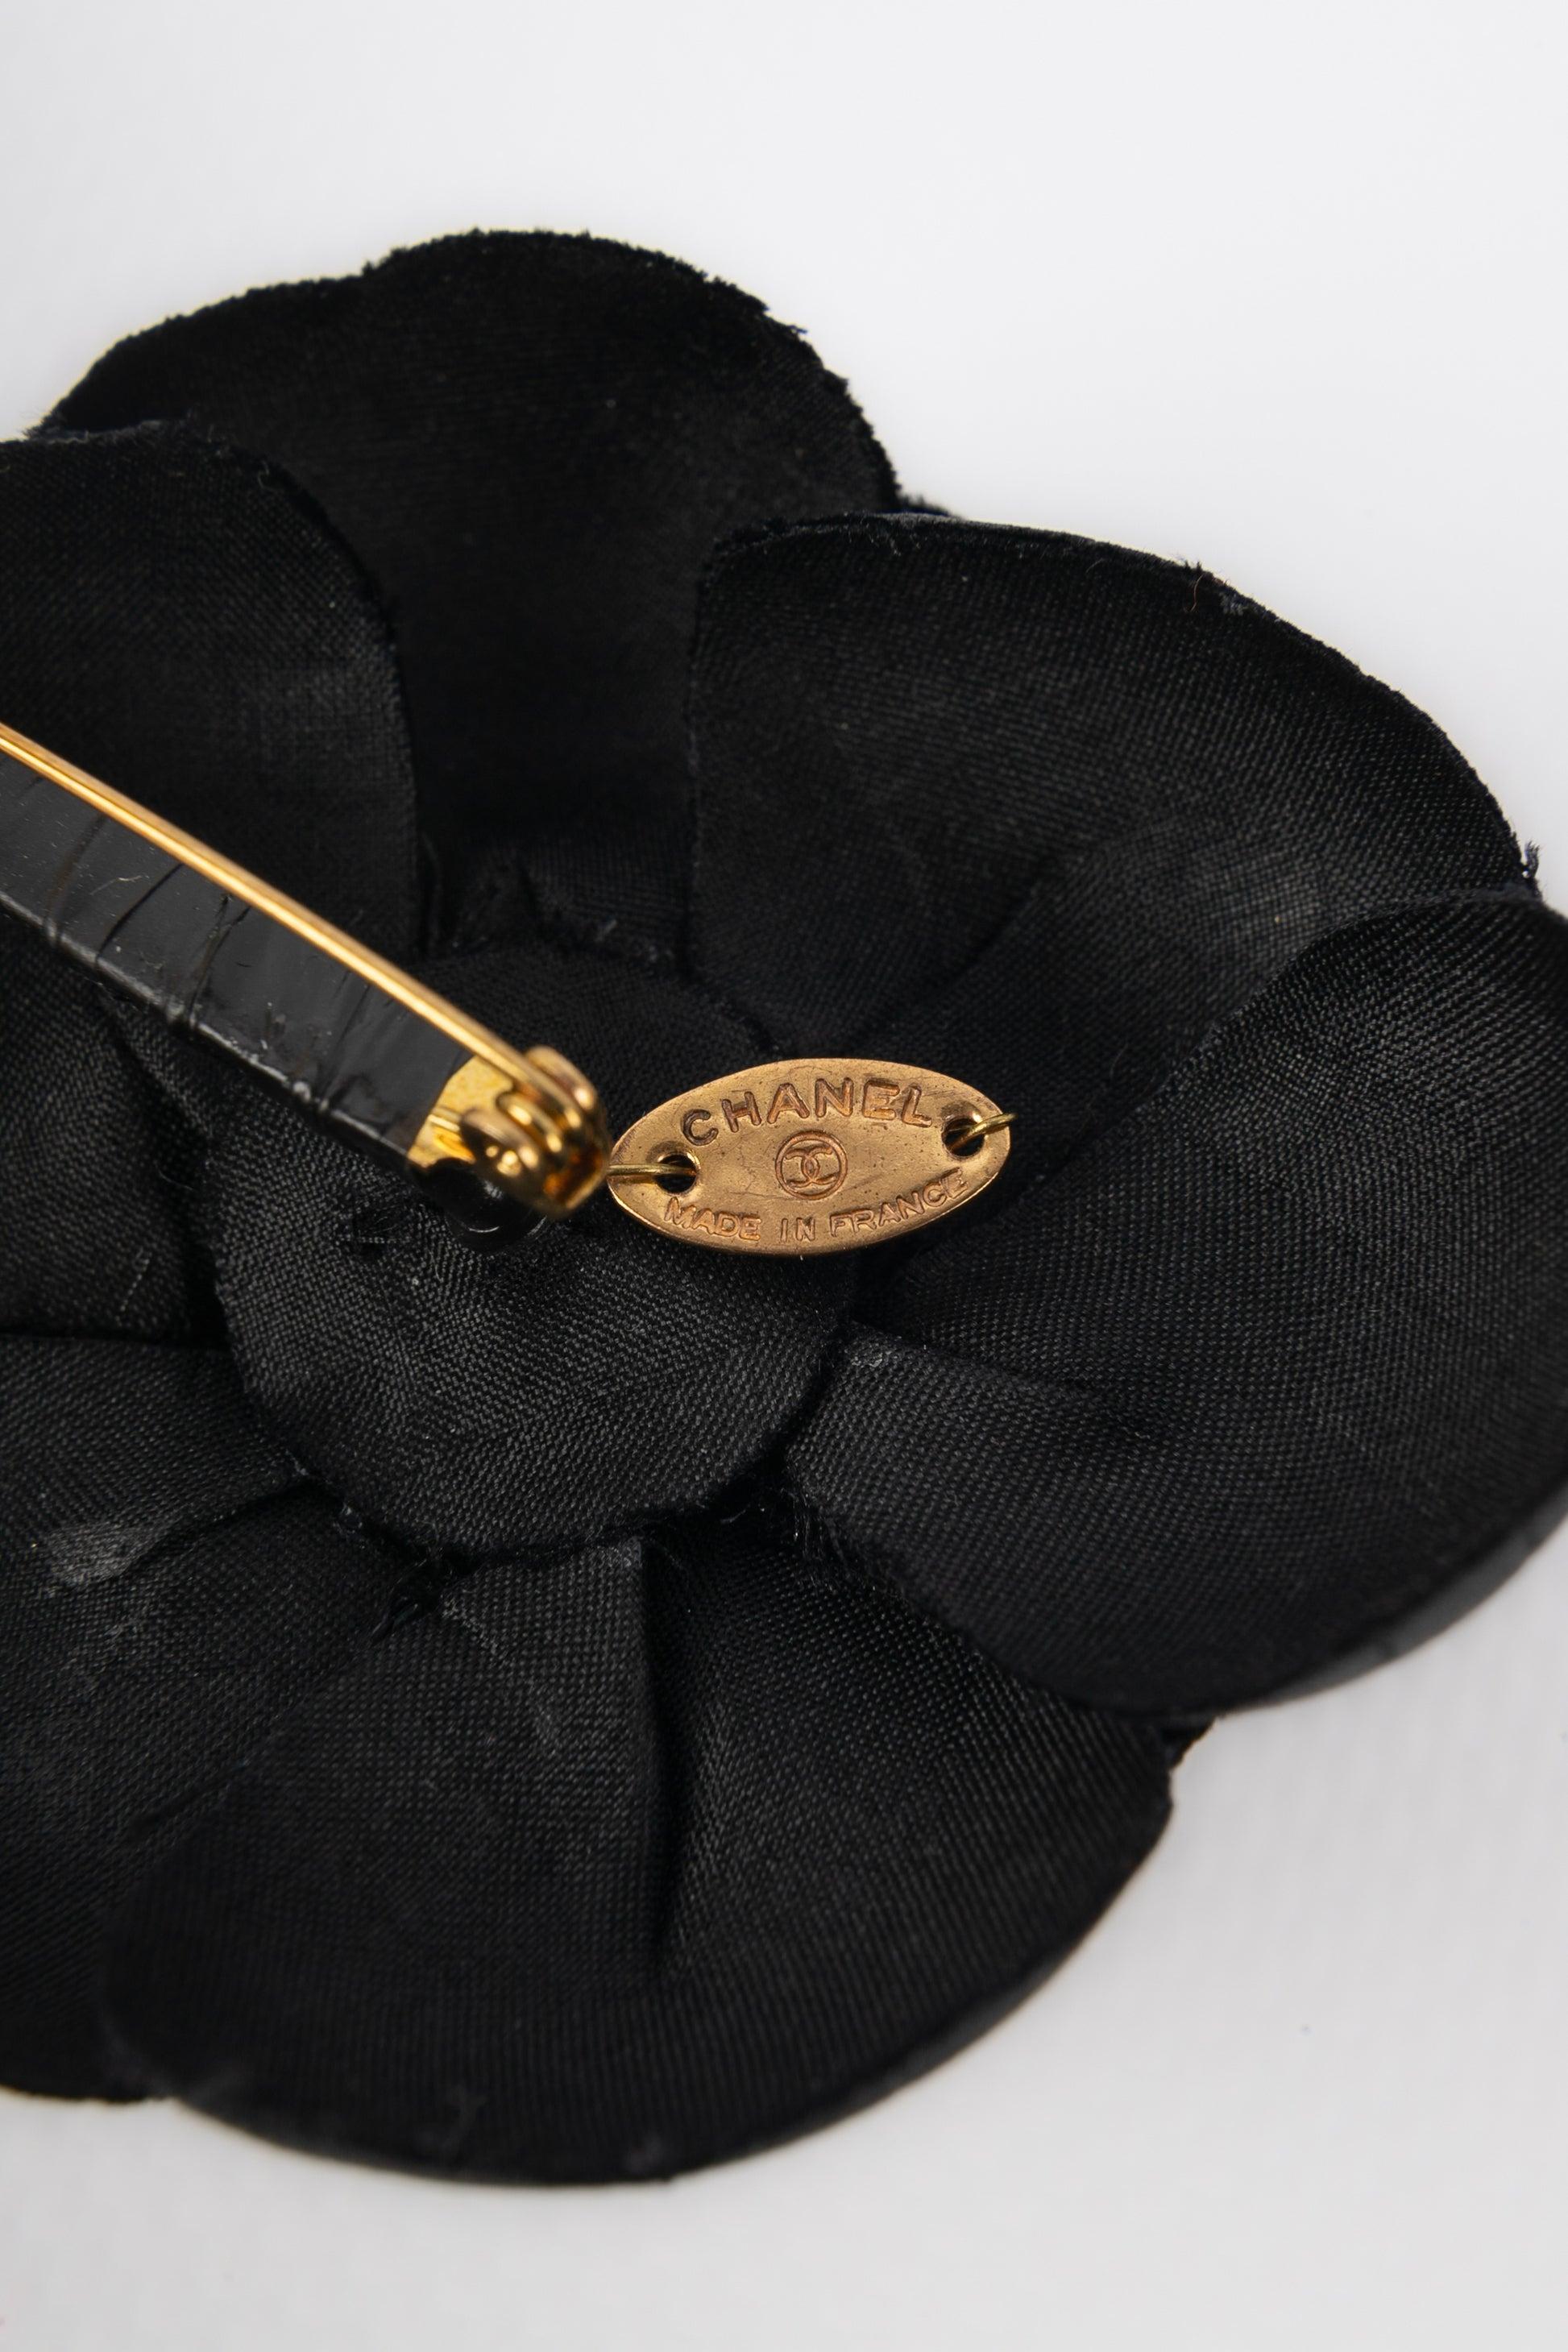 Chanel Black Woven Fabric Camellia Brooch For Sale 1